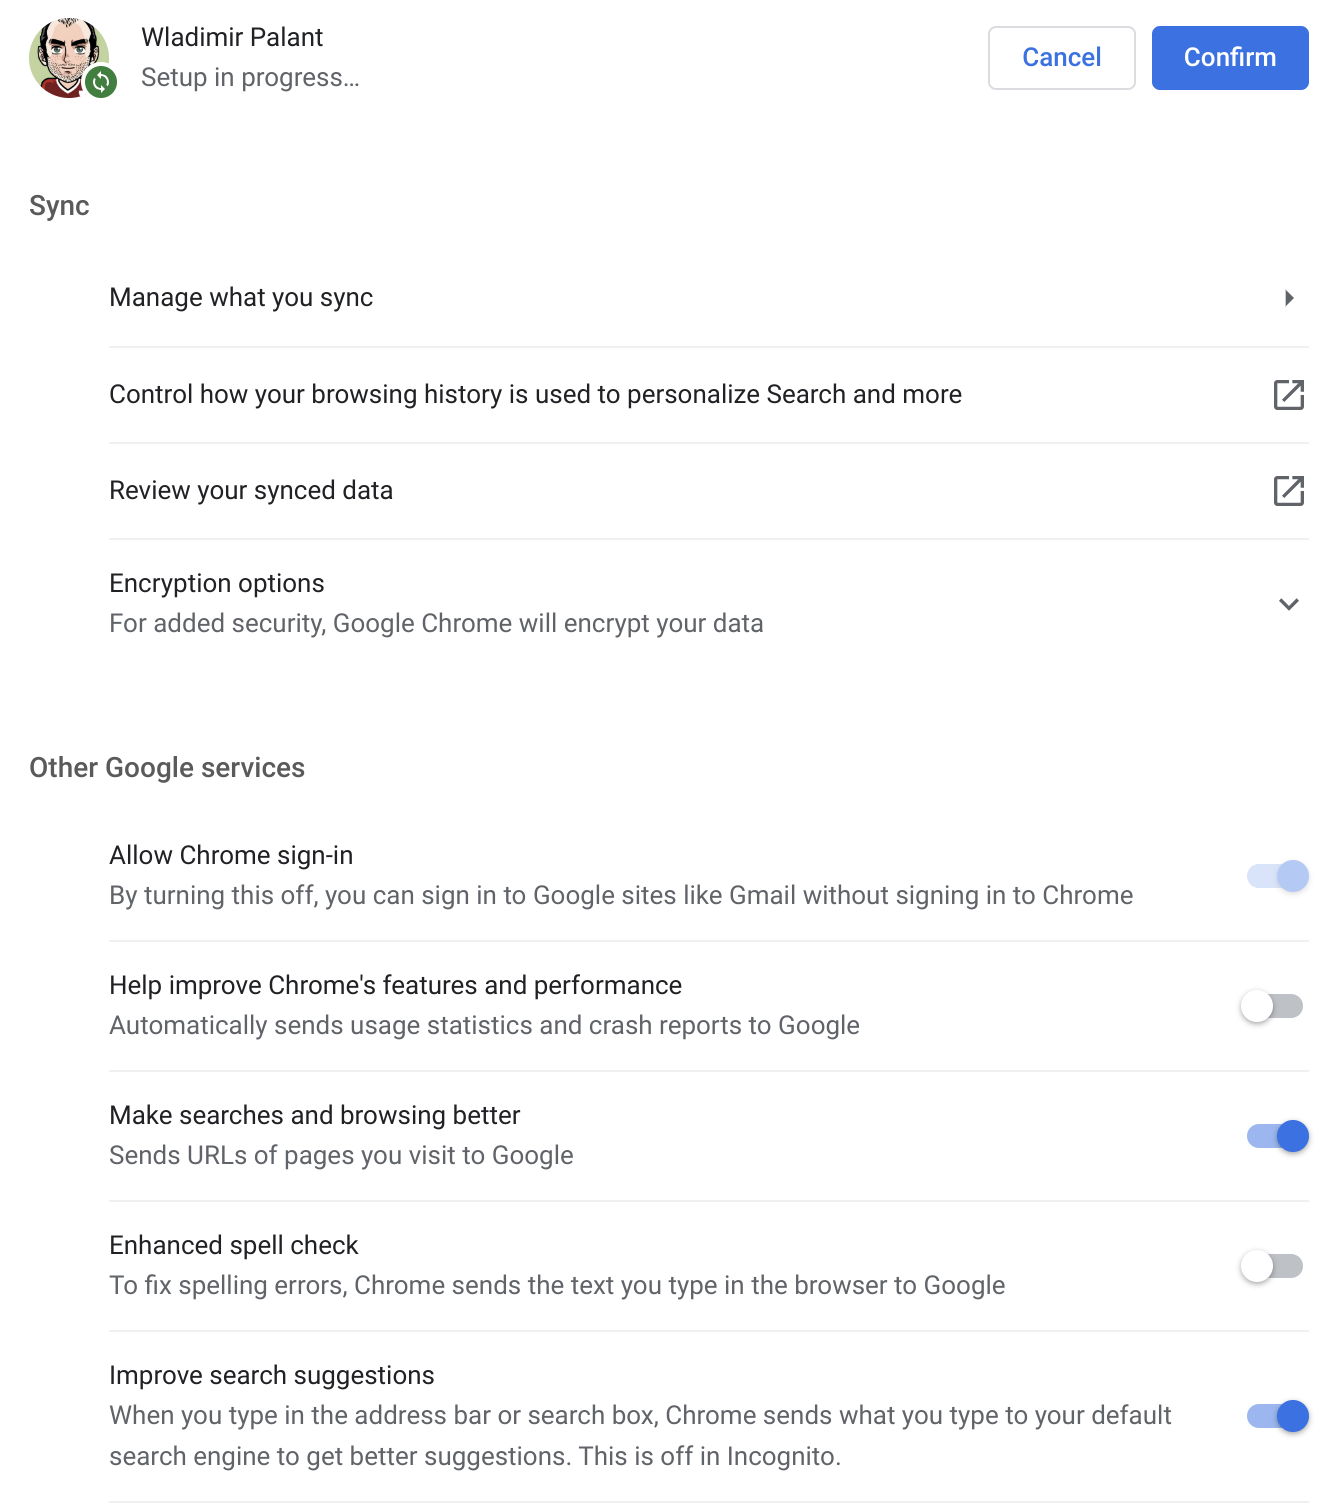 A message saying “Setup in progress” along with buttons “Cancel” and “Confirm.” Below it Chrome settings, featuring “Sync” and “Other services” sections.